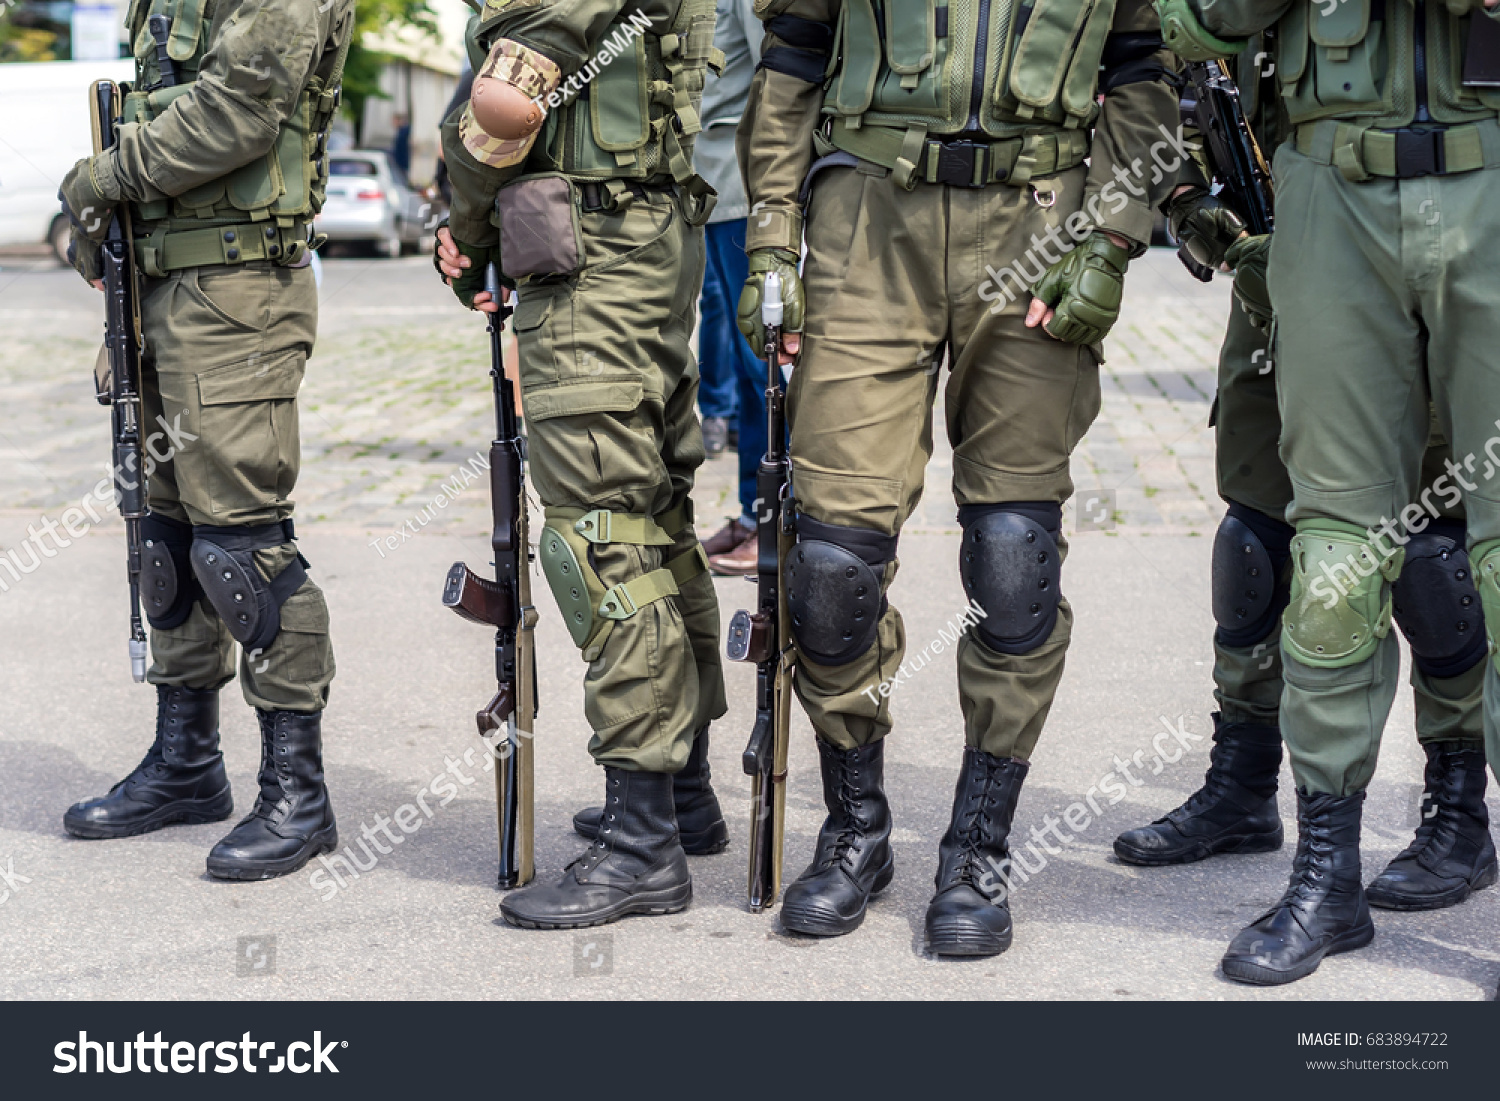 1,017 Russian soldiers syria Images, Stock Photos & Vectors | Shutterstock